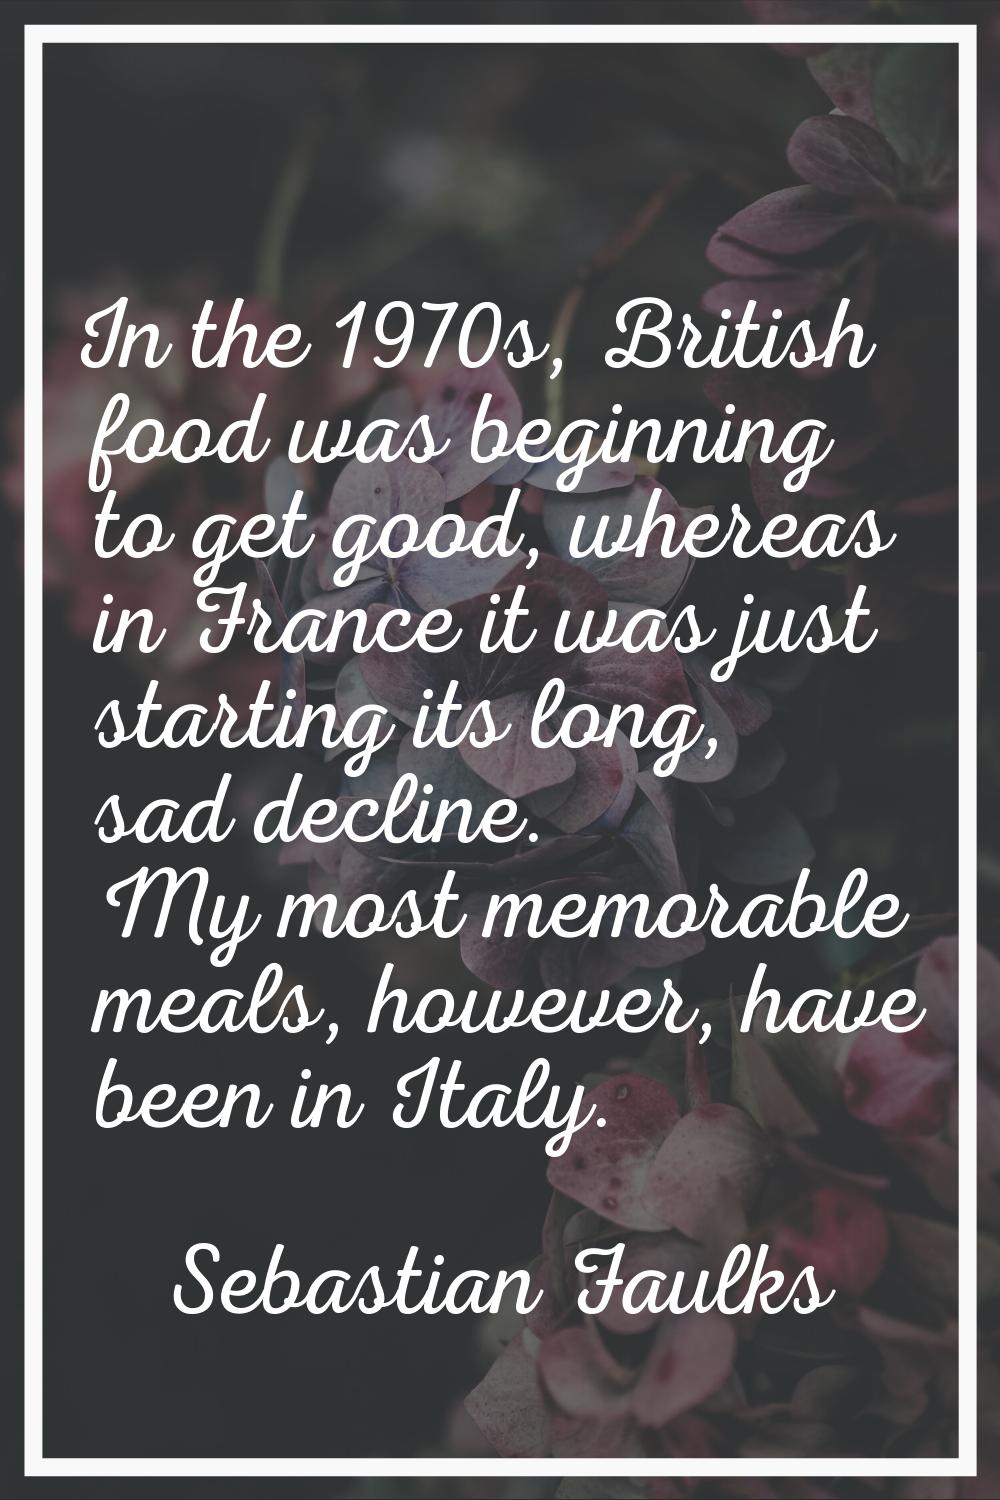 In the 1970s, British food was beginning to get good, whereas in France it was just starting its lo